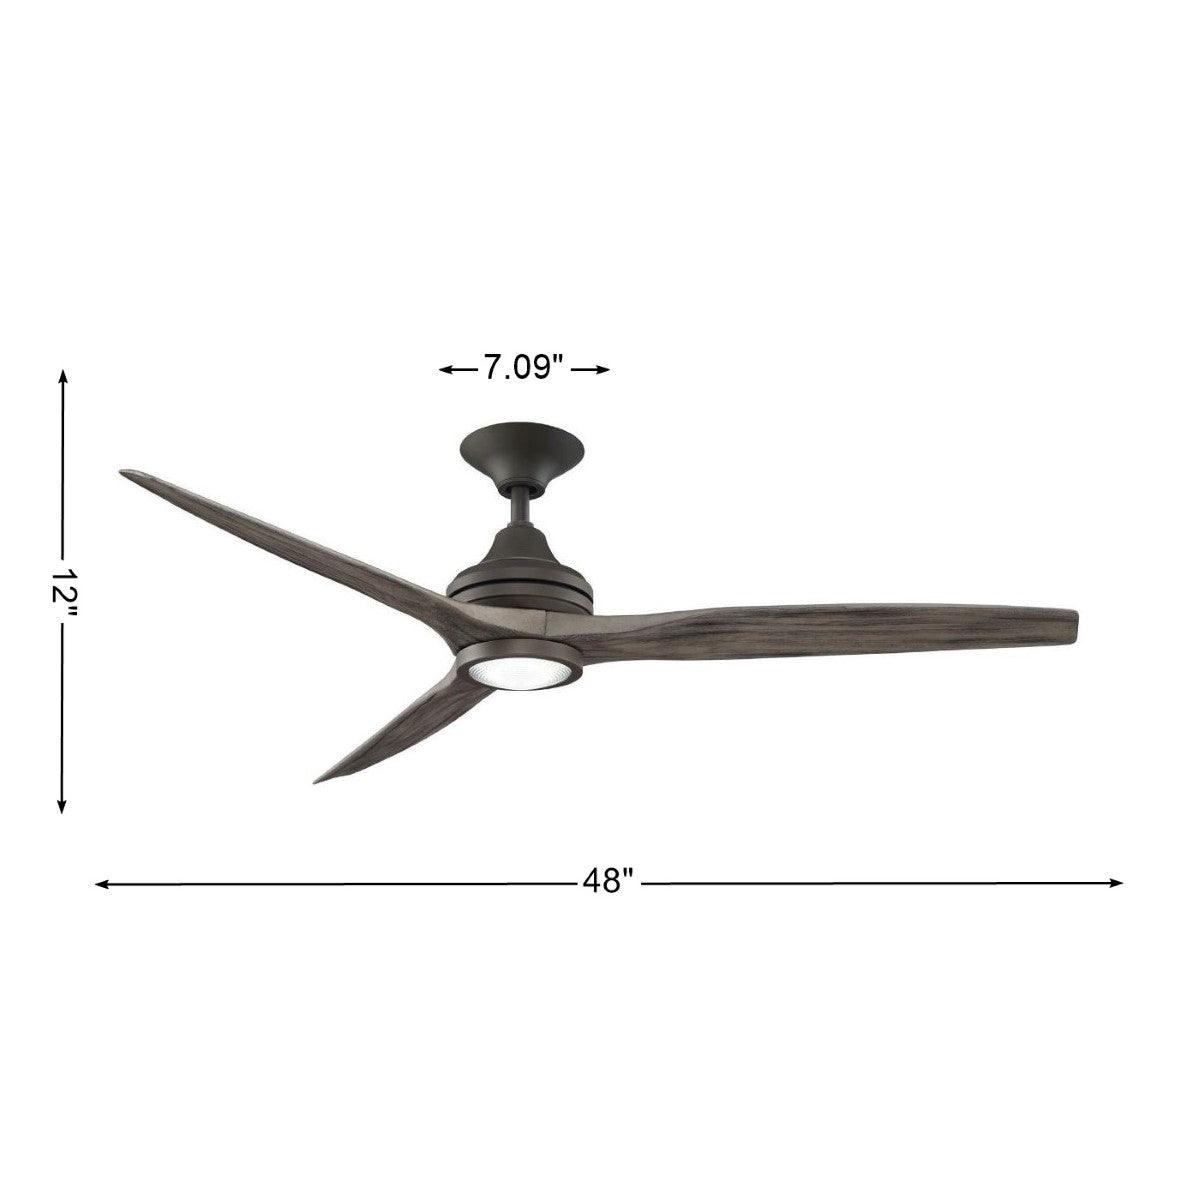 Spitfire Outdoor Ceiling Fan Motor With Remote, Set of 3 Blades Sold Separately - Bees Lighting